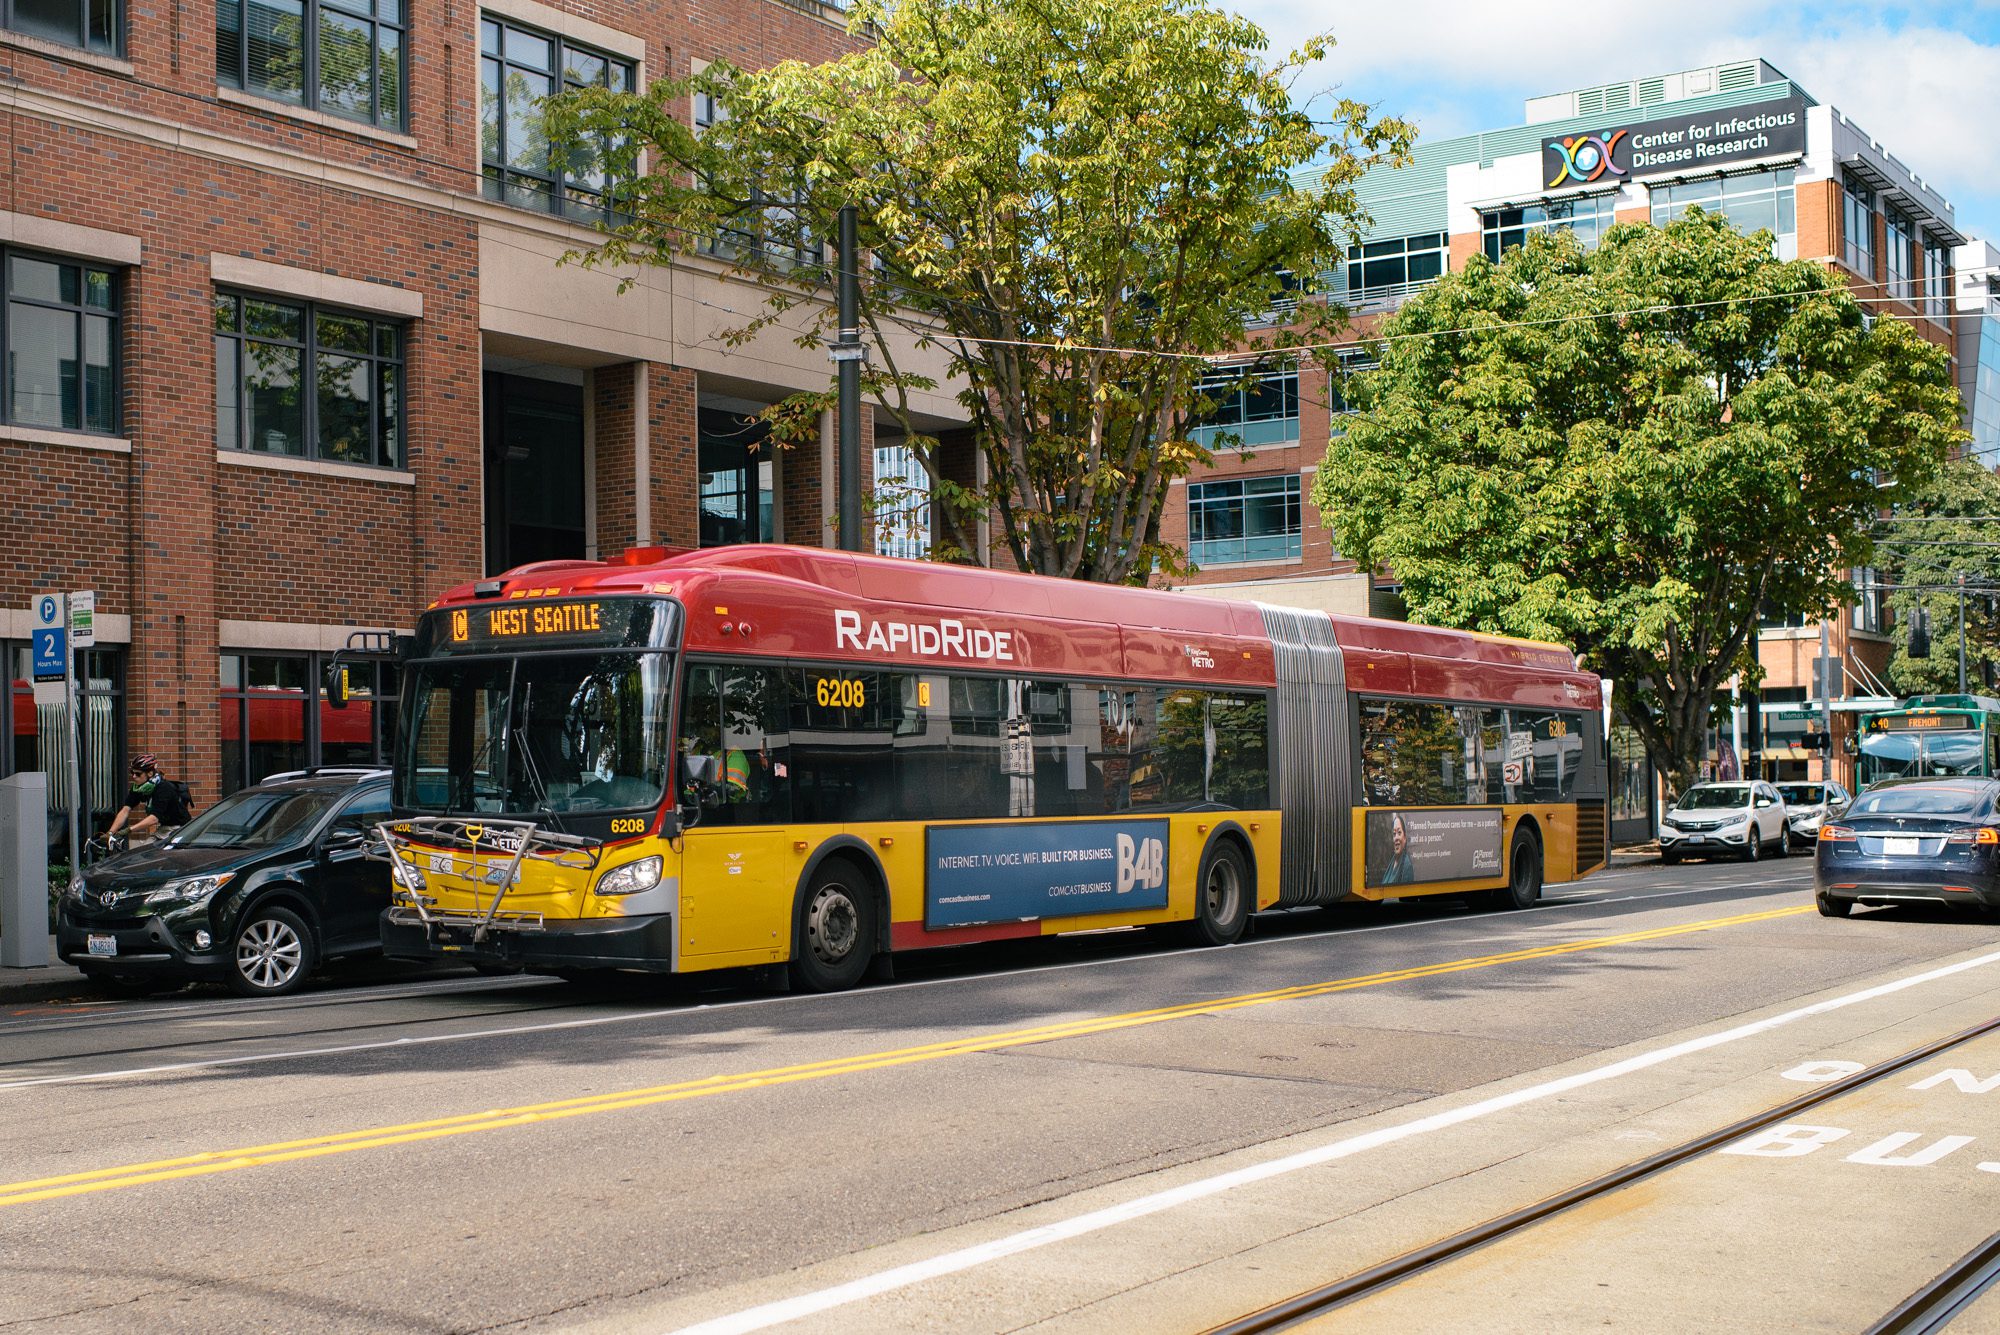 A RapidRide bus travels down a street on a sunny day. Other vehicles, large buildings, and trees are also in the picture.